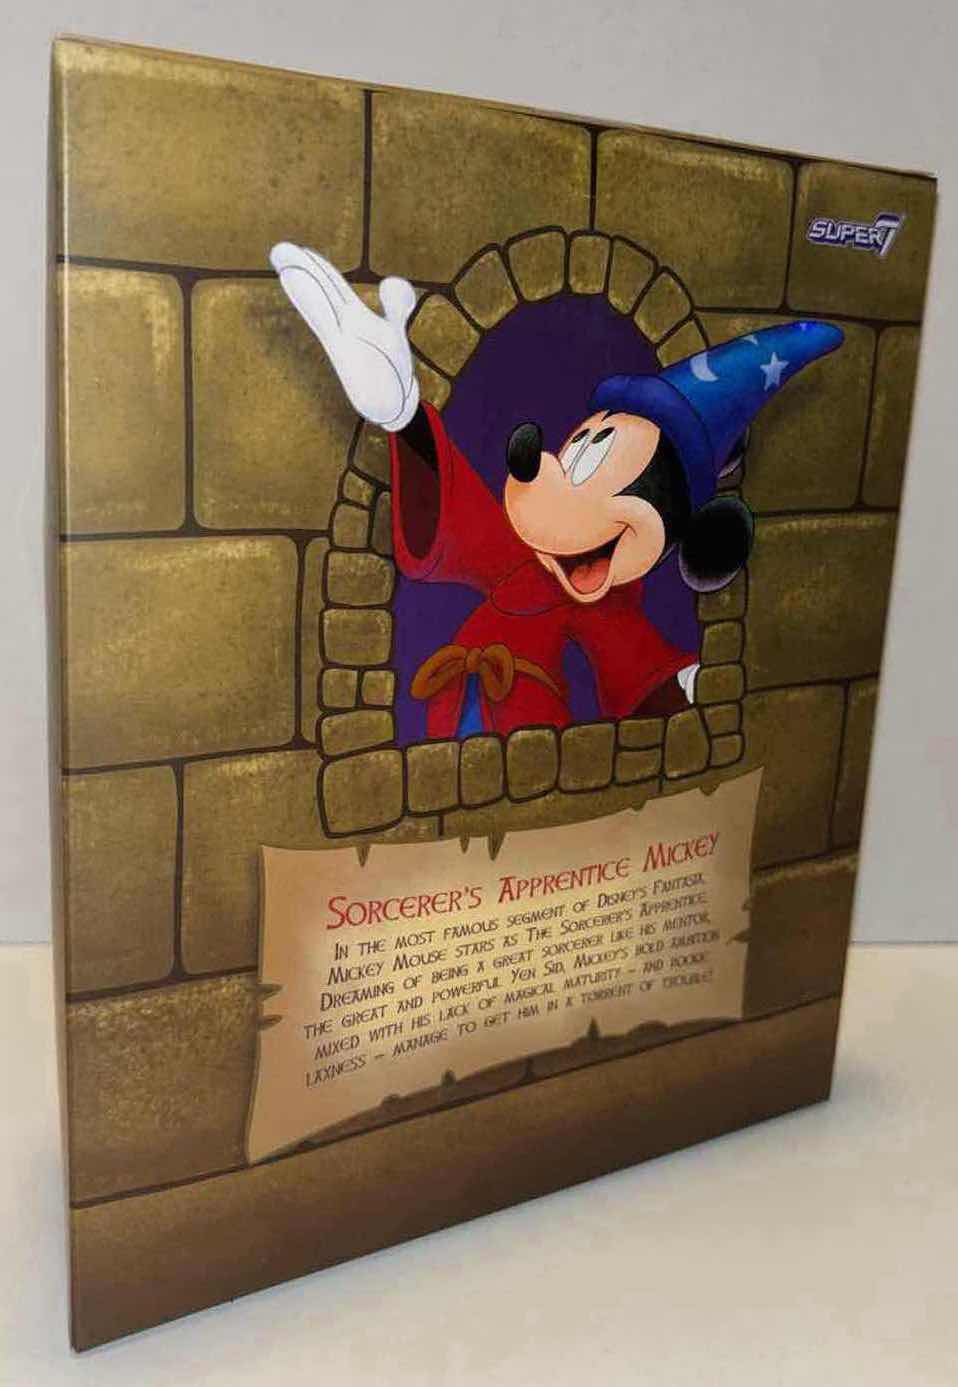 Photo 4 of NEW SUPER7 DISNEY FANTASIA 80 YEARS “SORCERER’S APPRENTICE MICKEY” ULTIMATES ACTION FIGURE & ACCESSORIES